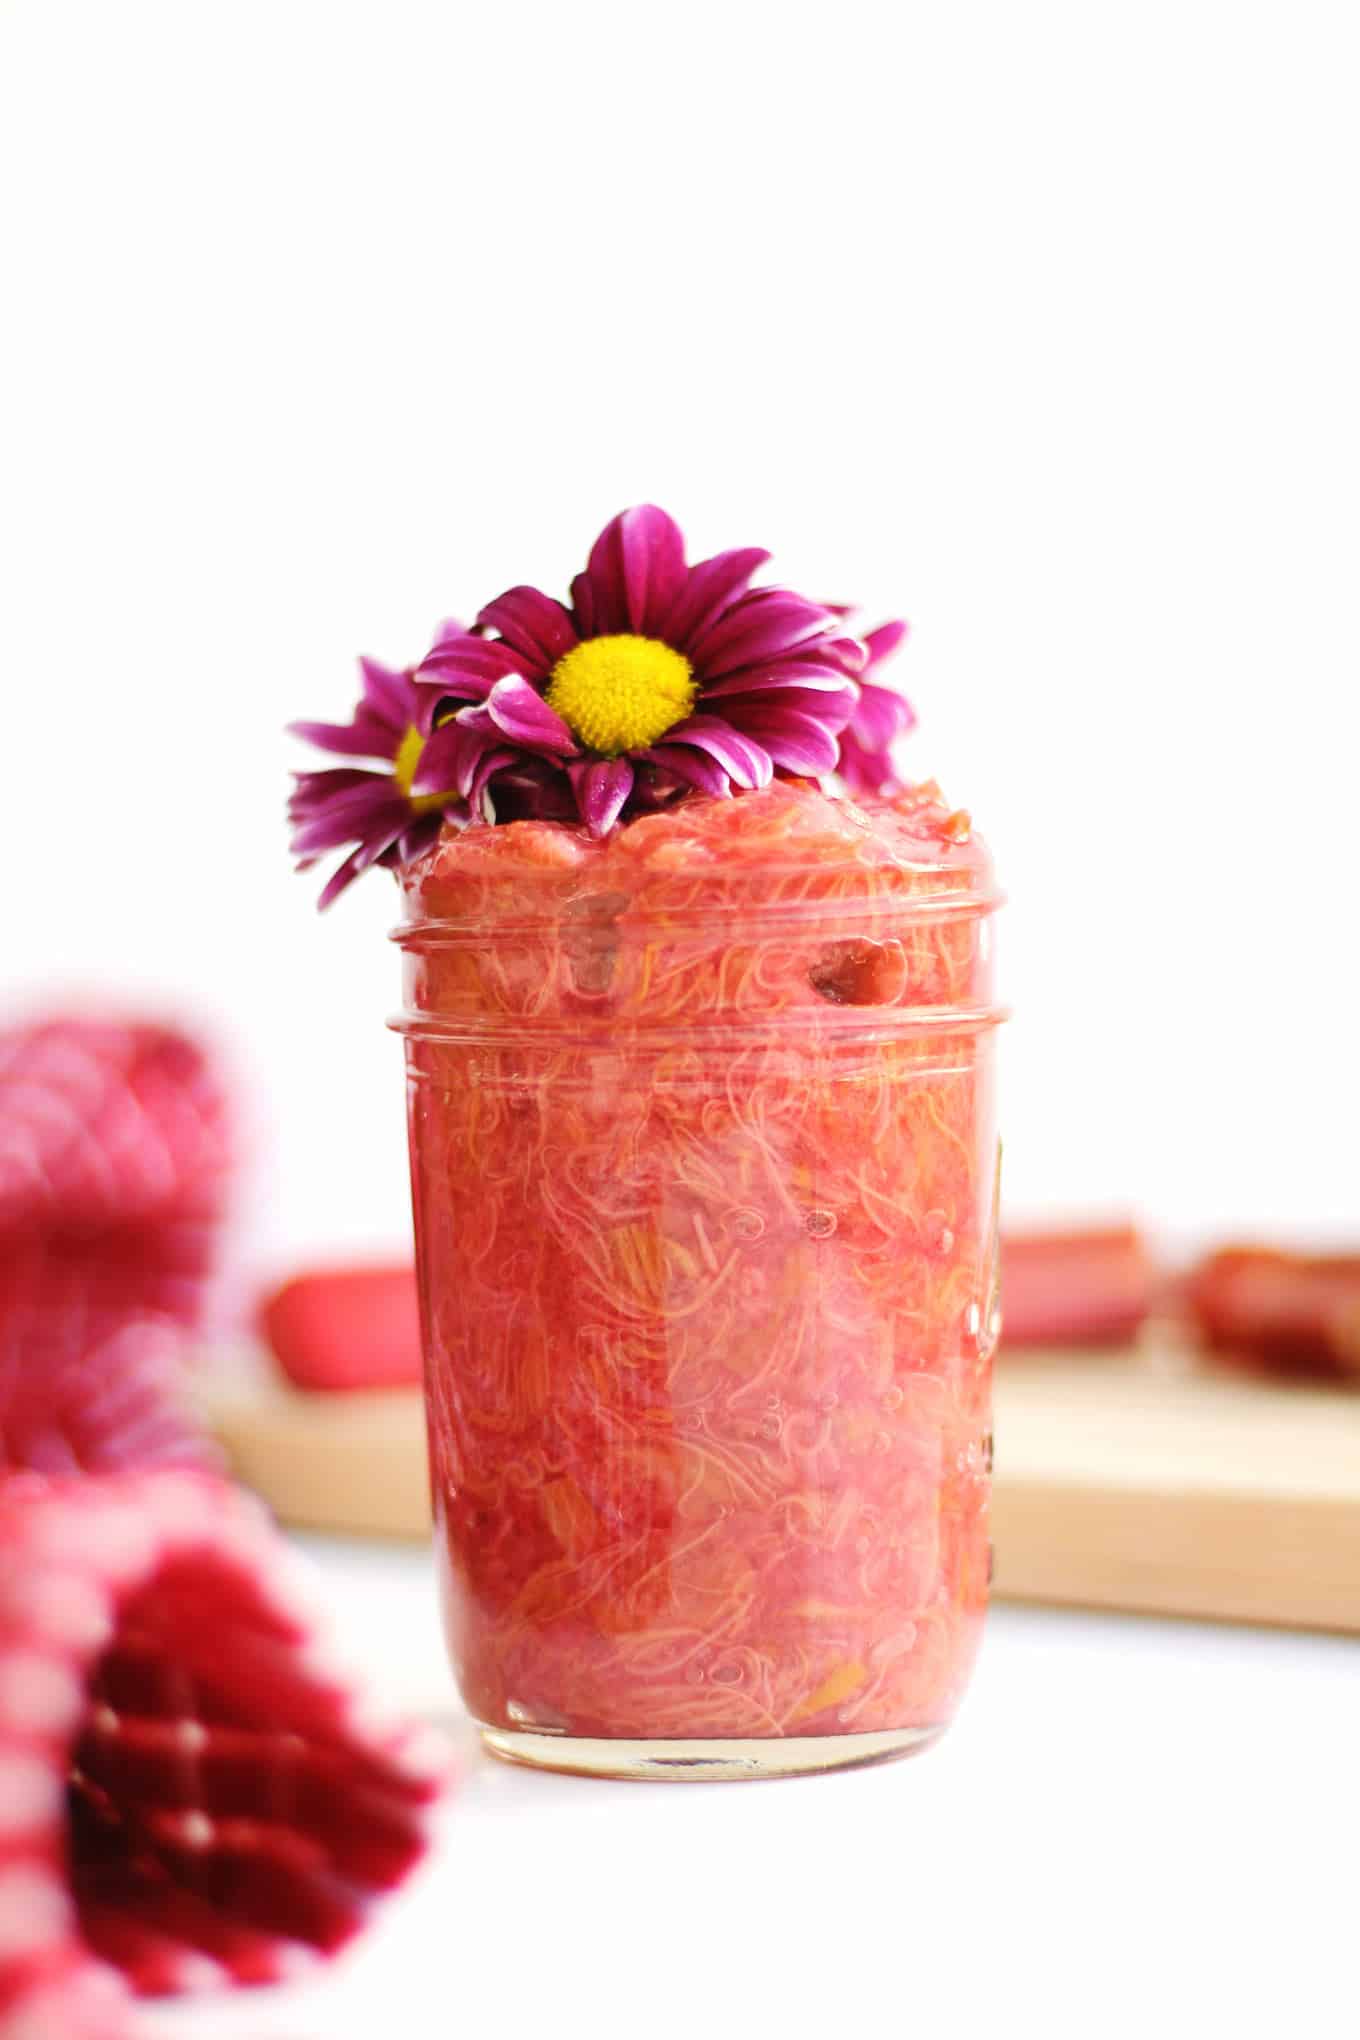 Rhubarb jam in a mason jar topped with purple flowers